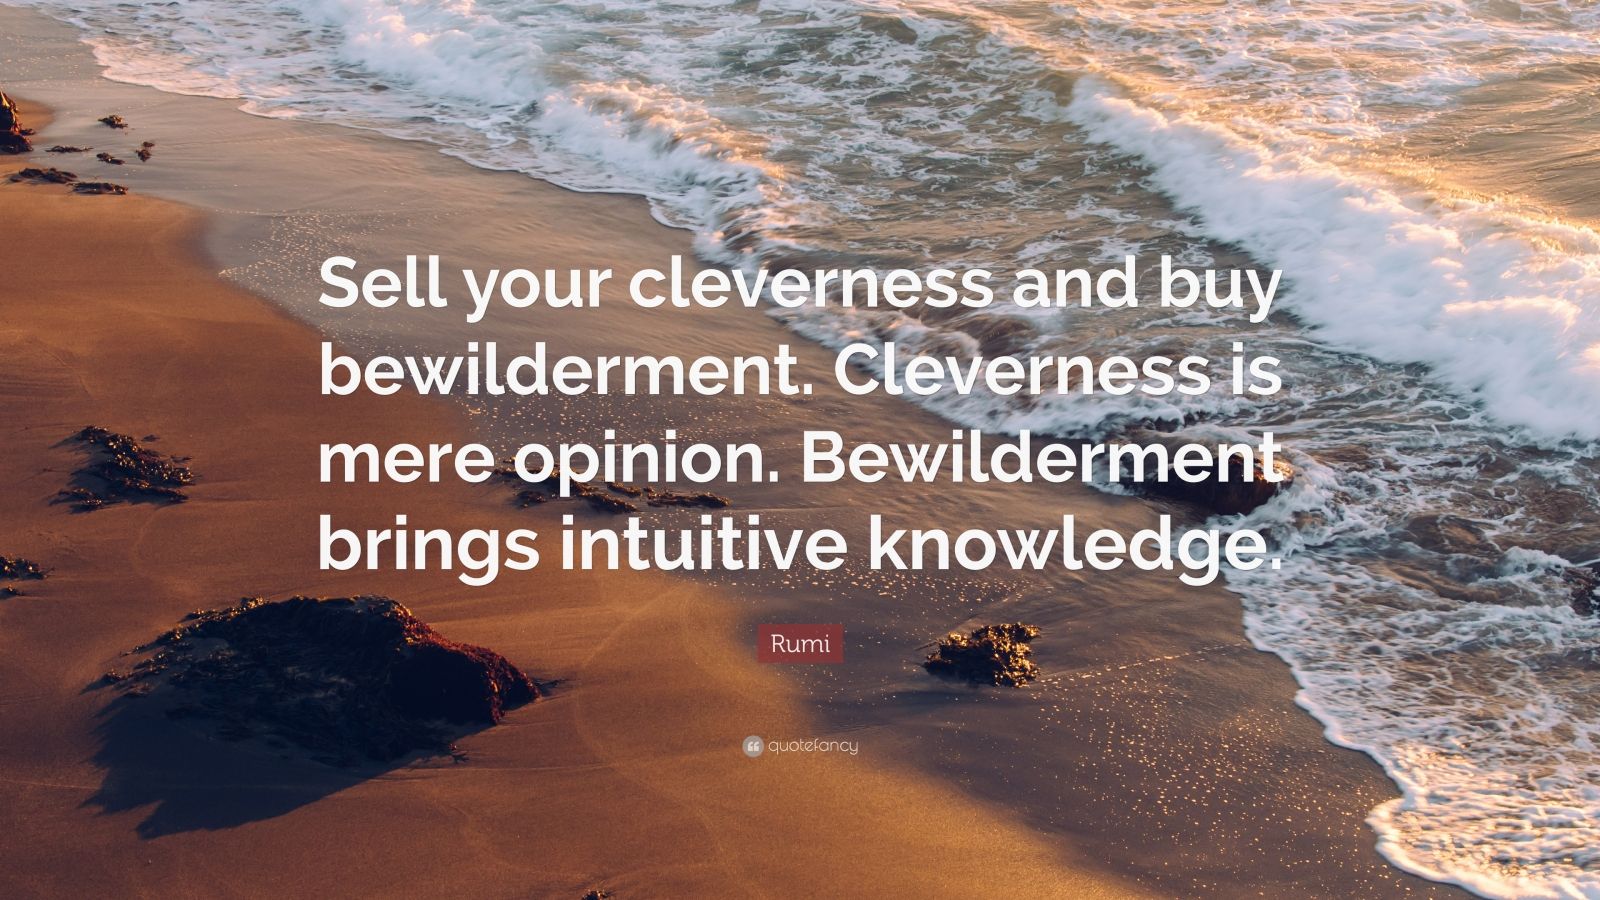 Rumi Quote “Sell your cleverness and buy bewilderment